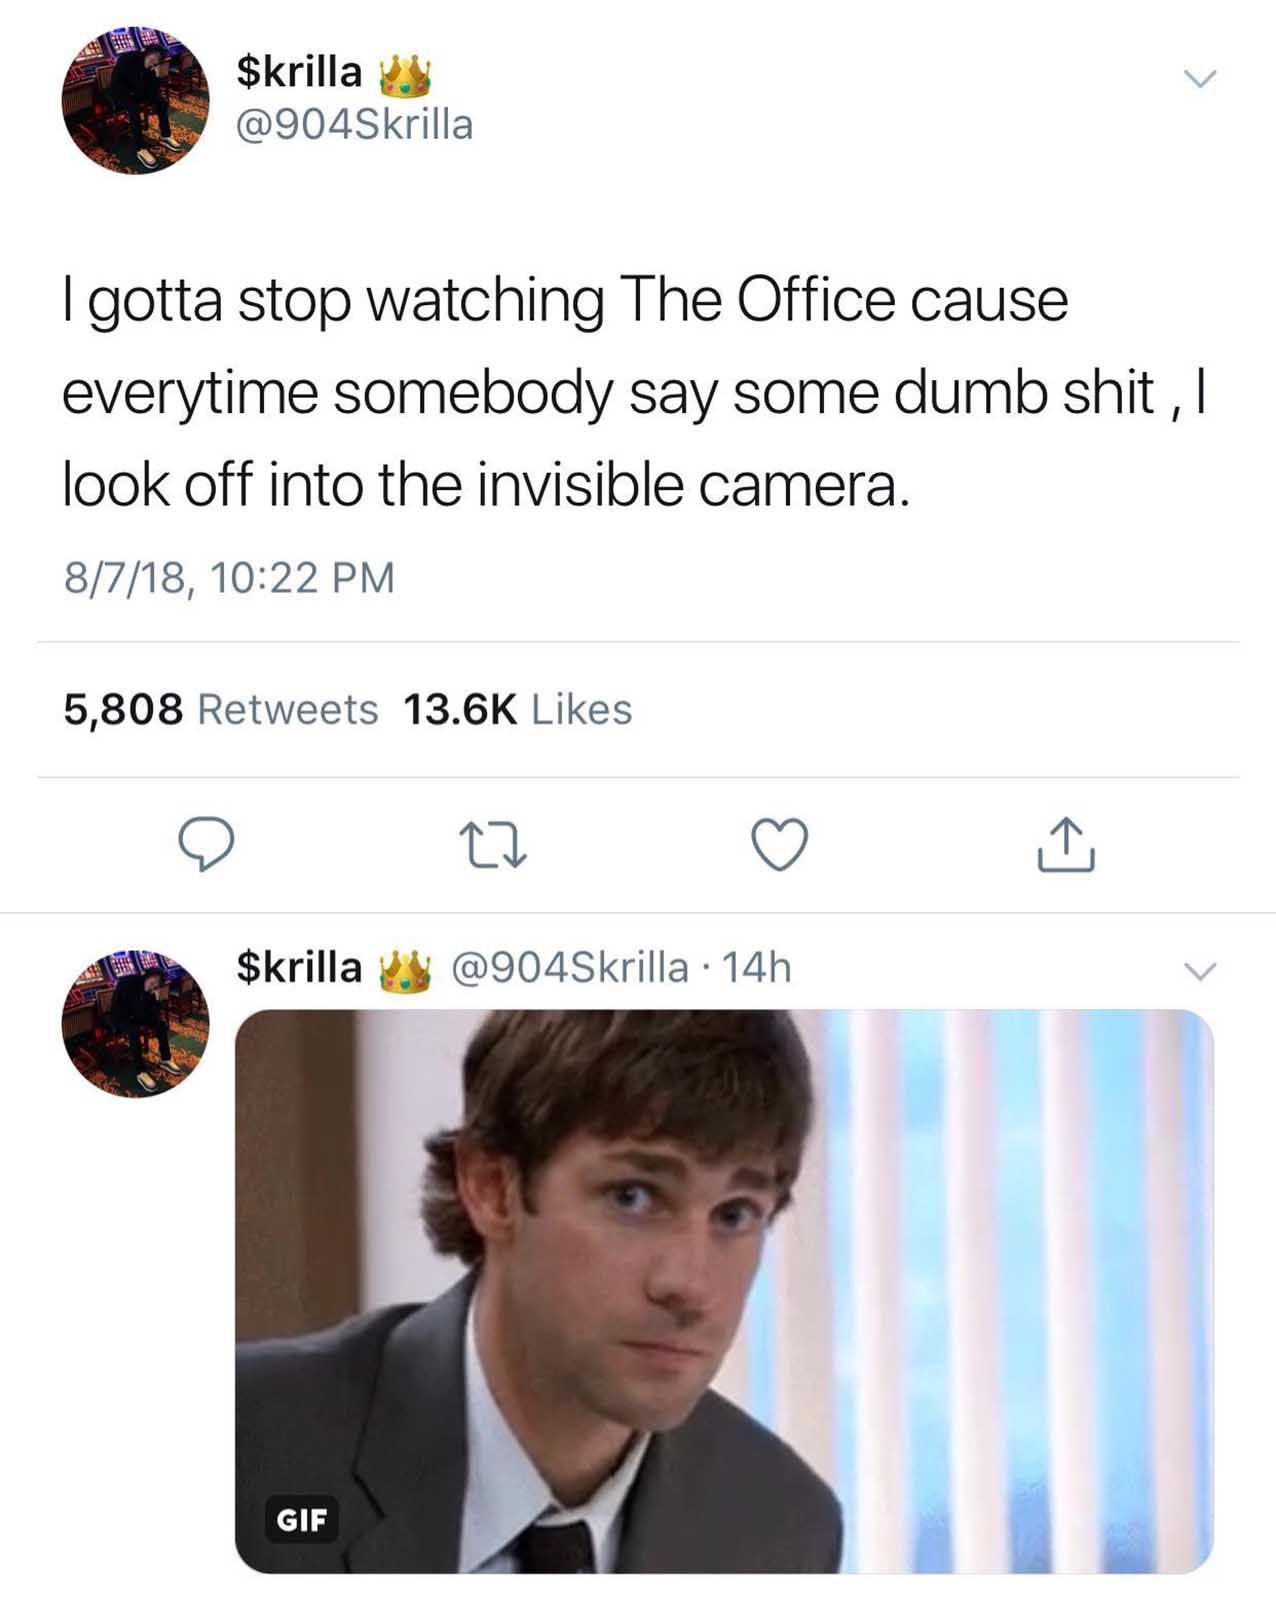 crazy-office-memes twitter memes funny tweets - v $krilla I gotta stop watching The Office cause everytime somebody say some dumb shit, I look off into the invisible camera. 8718, 5,808 1 $krilla 14h Gif